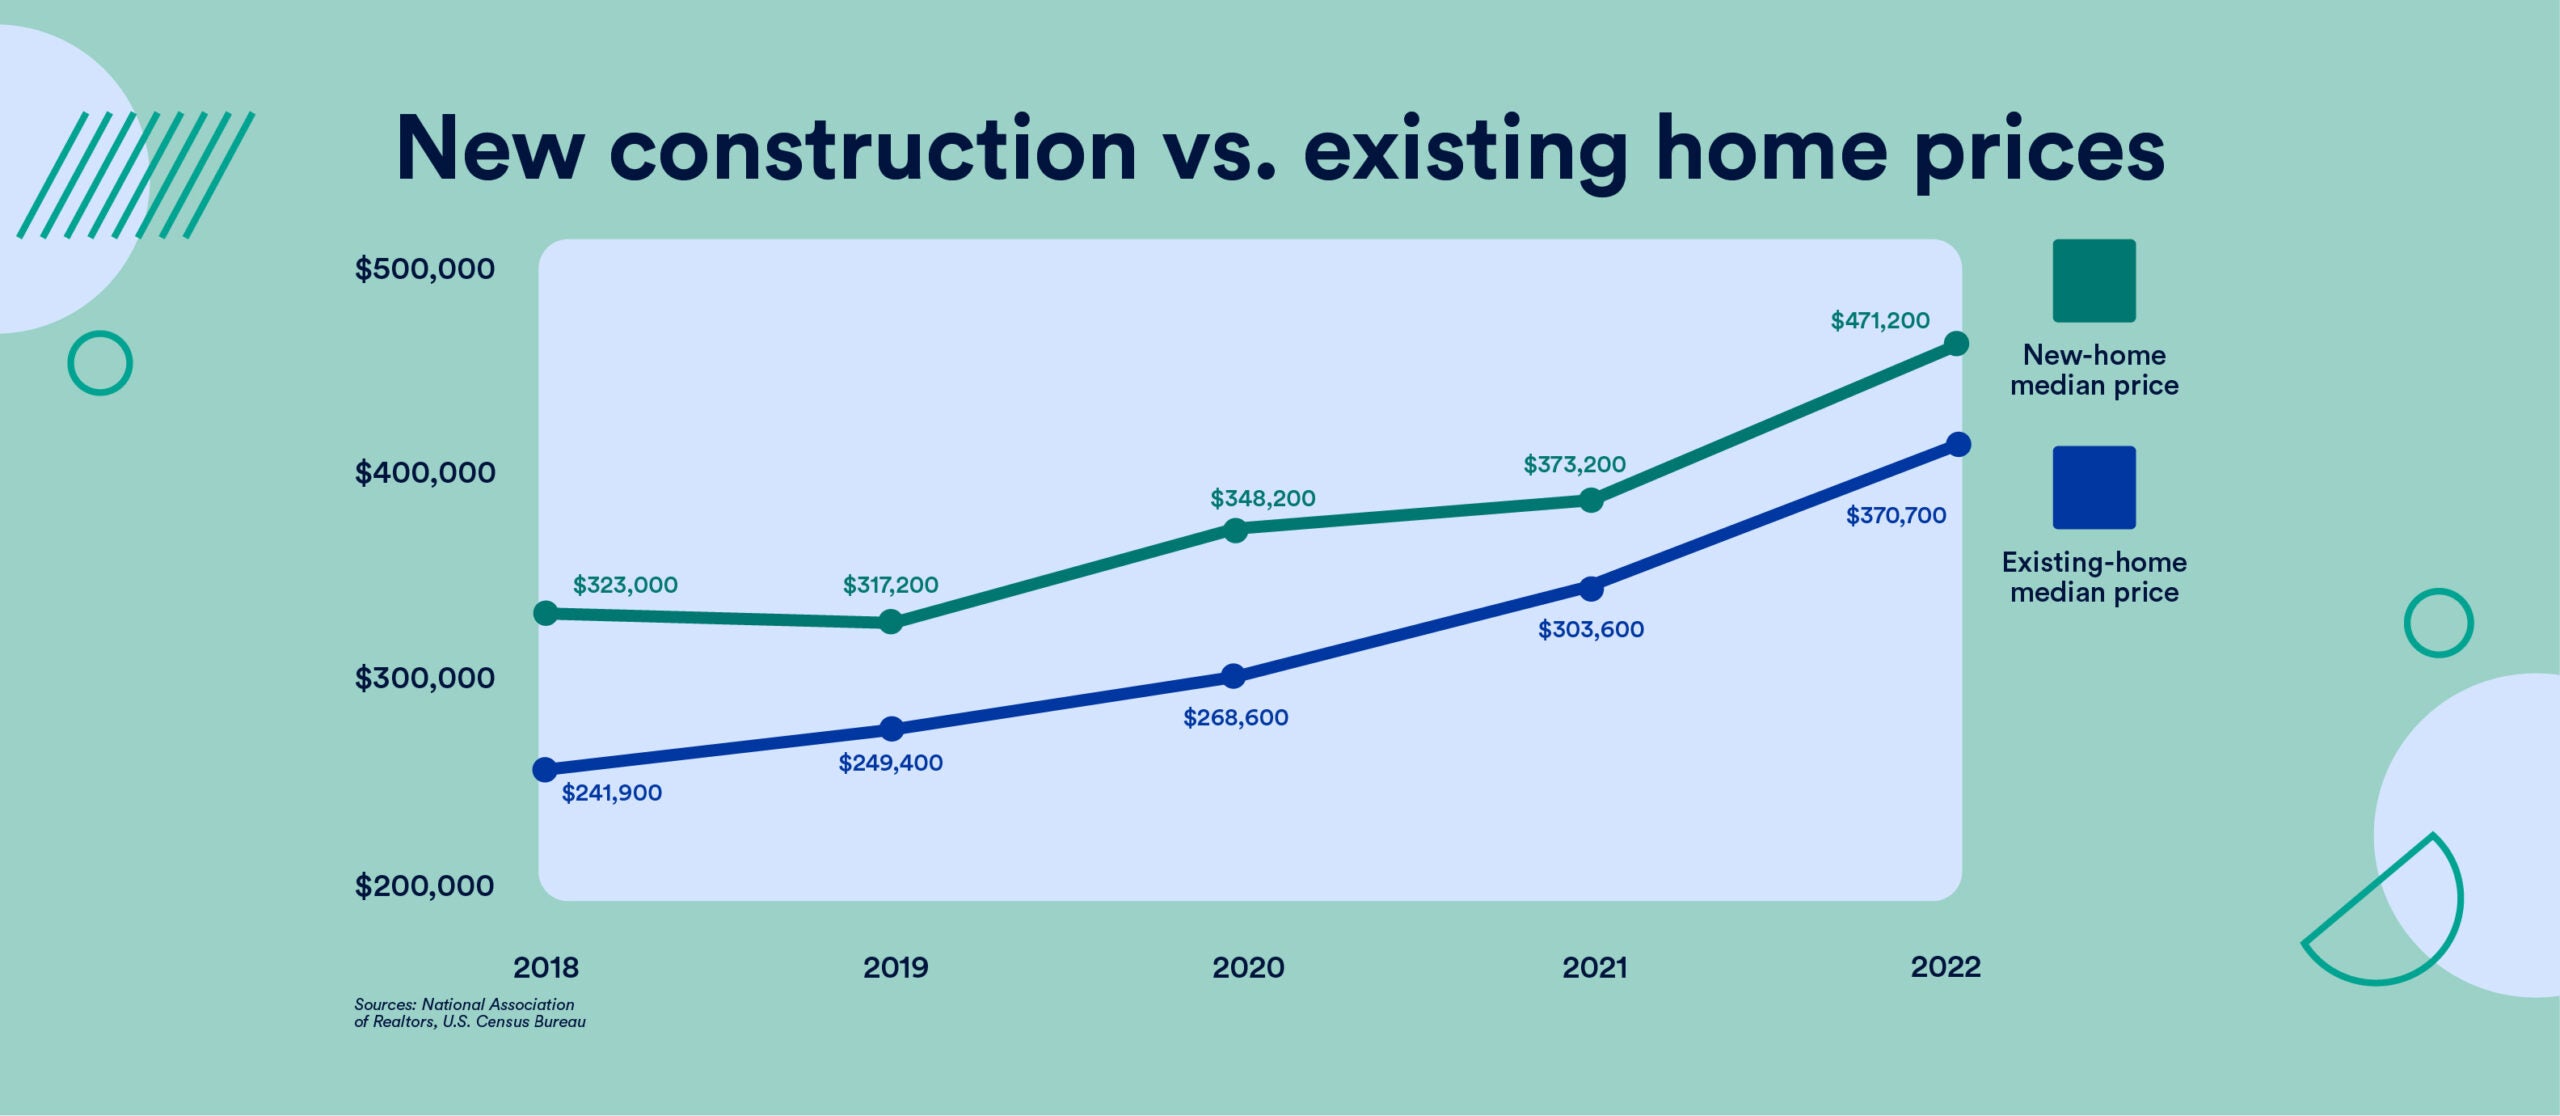 A chart that shows the increasing prices from 2018 to 2022 for both new construction and existing homes